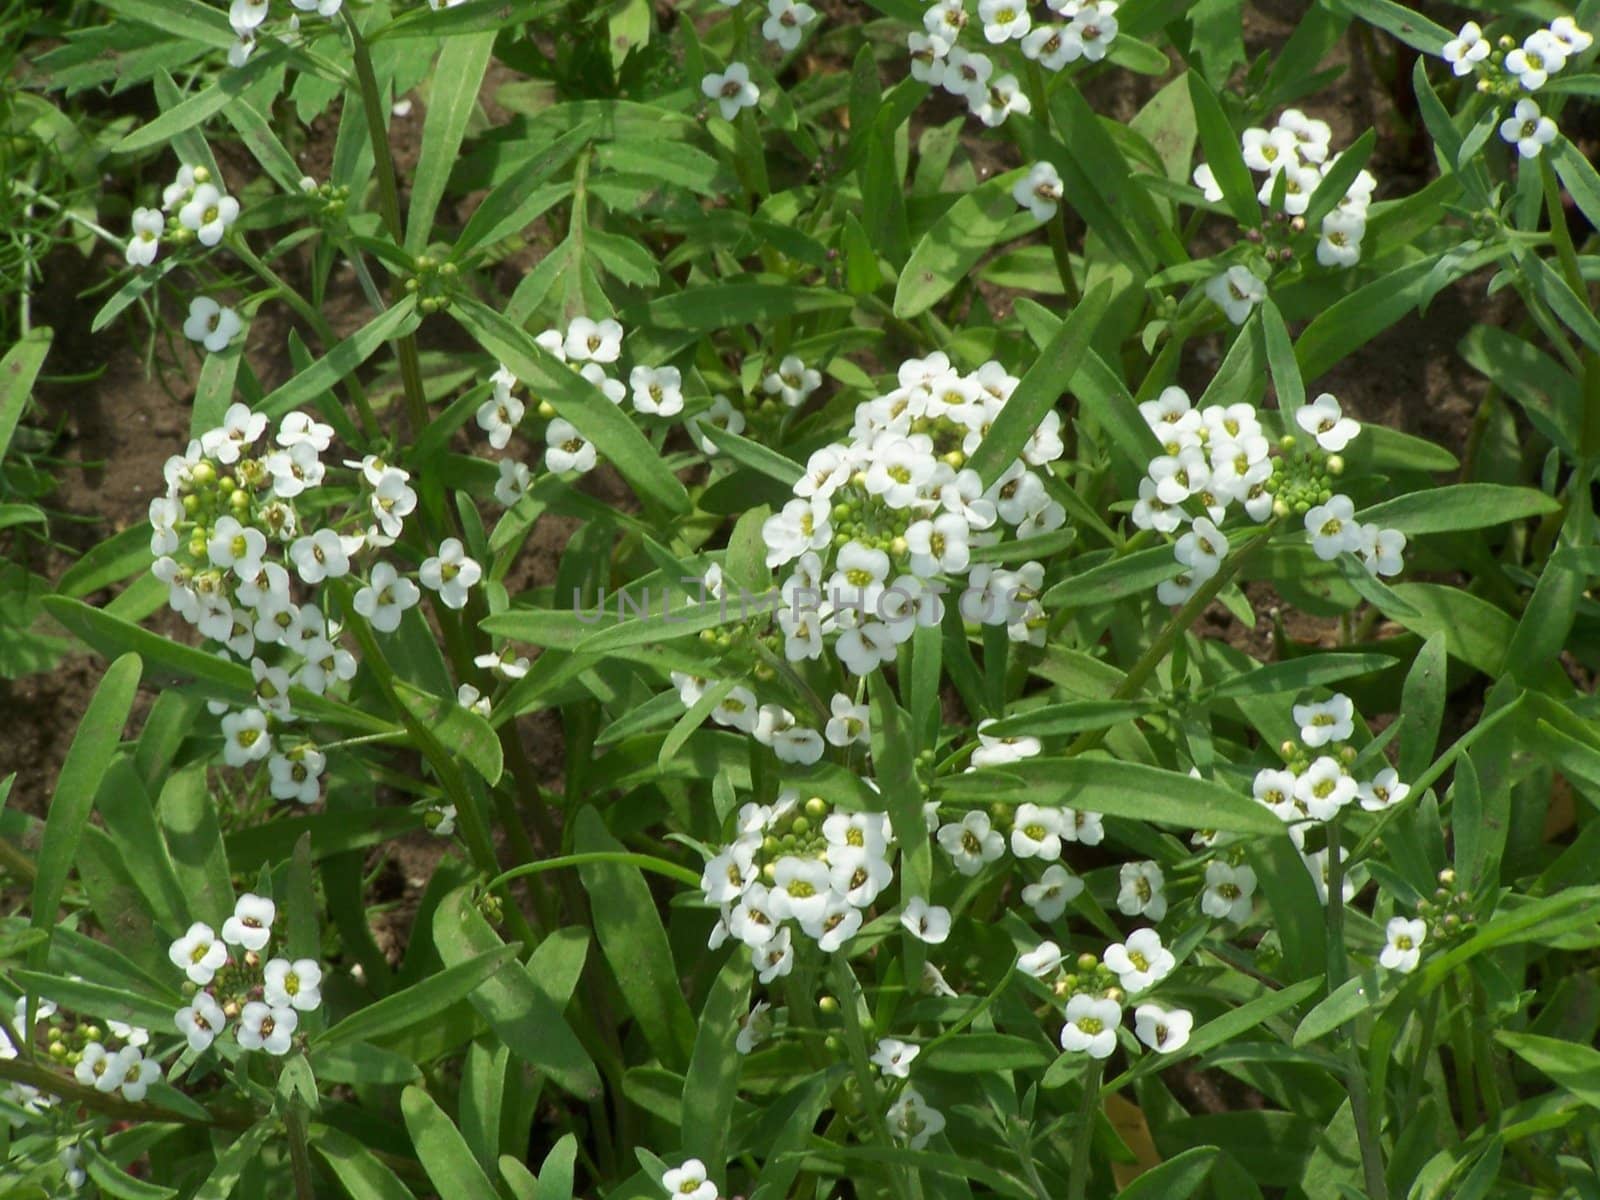 Close up of the little white flowers